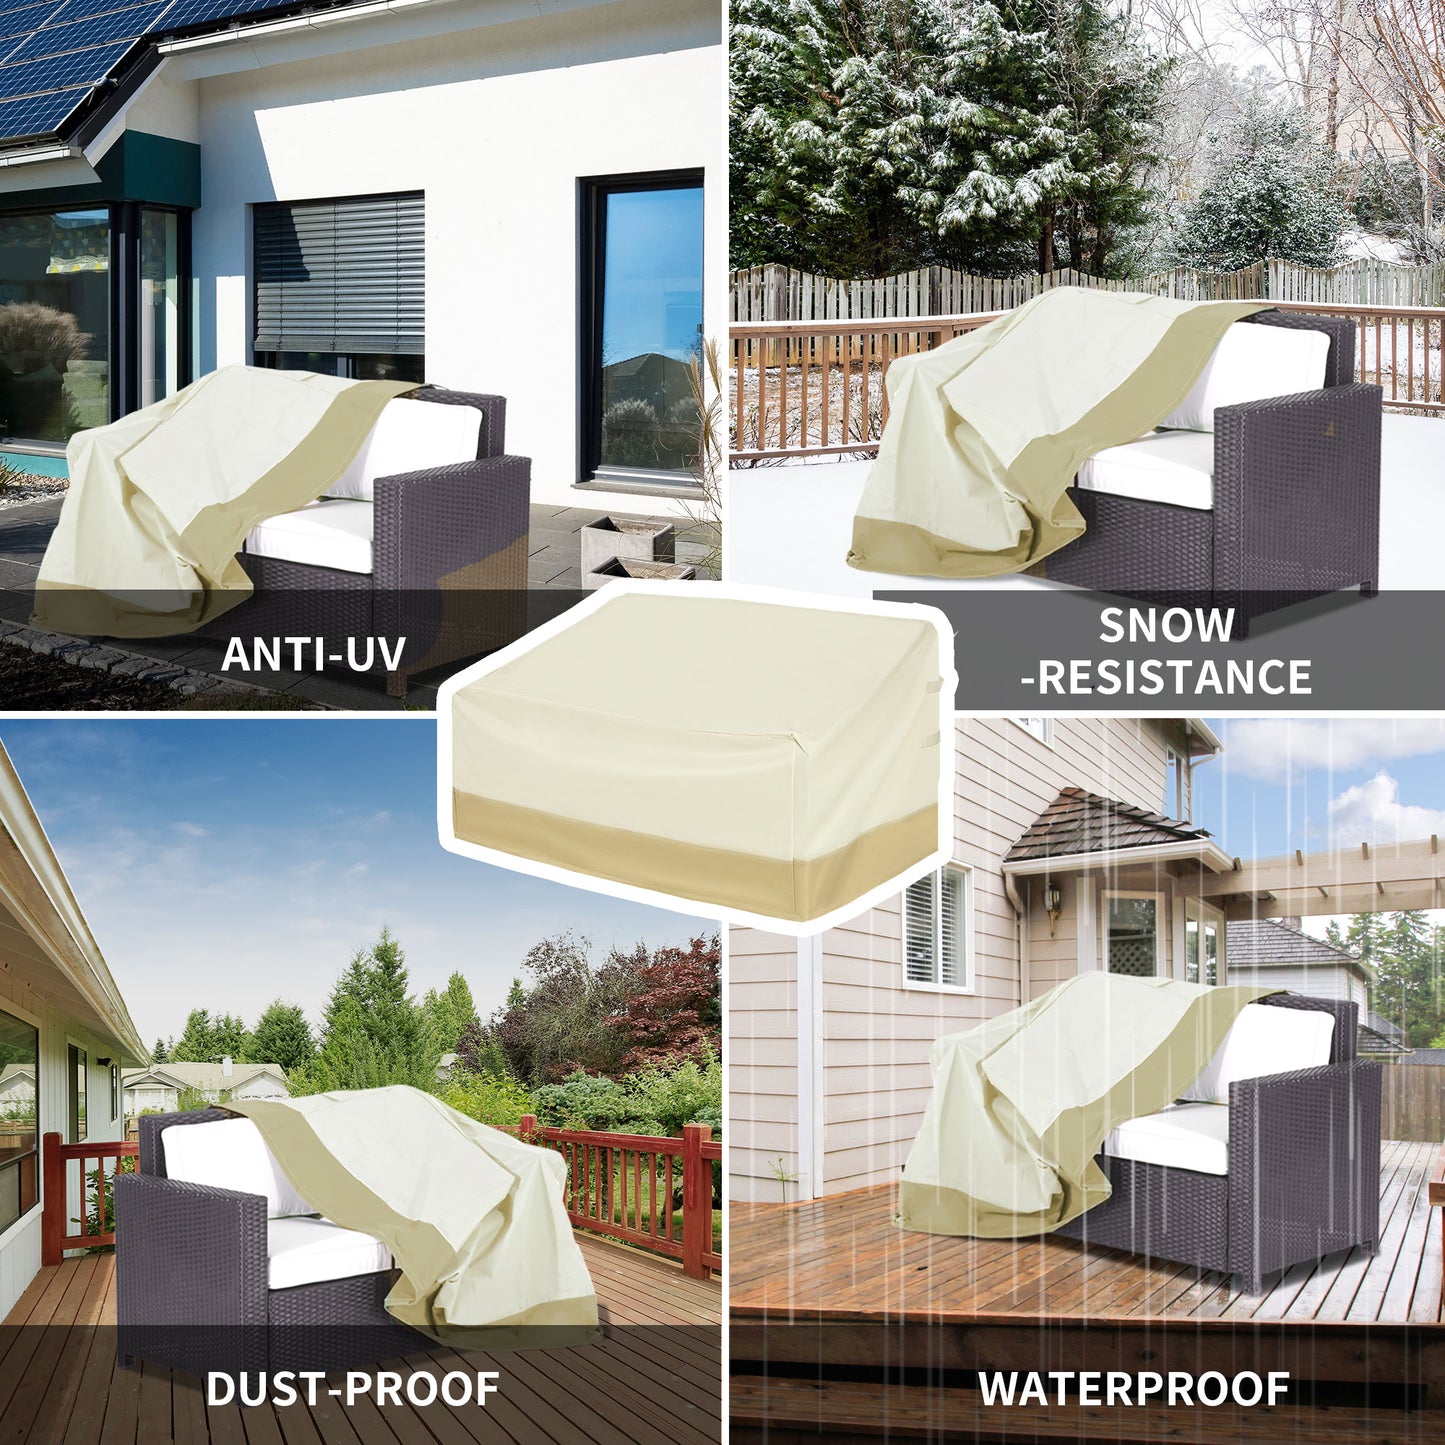 Outsunny Outdoor Furniture Cover for 3 Seat Rattan Chair, Waterproof 600D Oxford Cloth, 152 x 87 x 58-79 cm